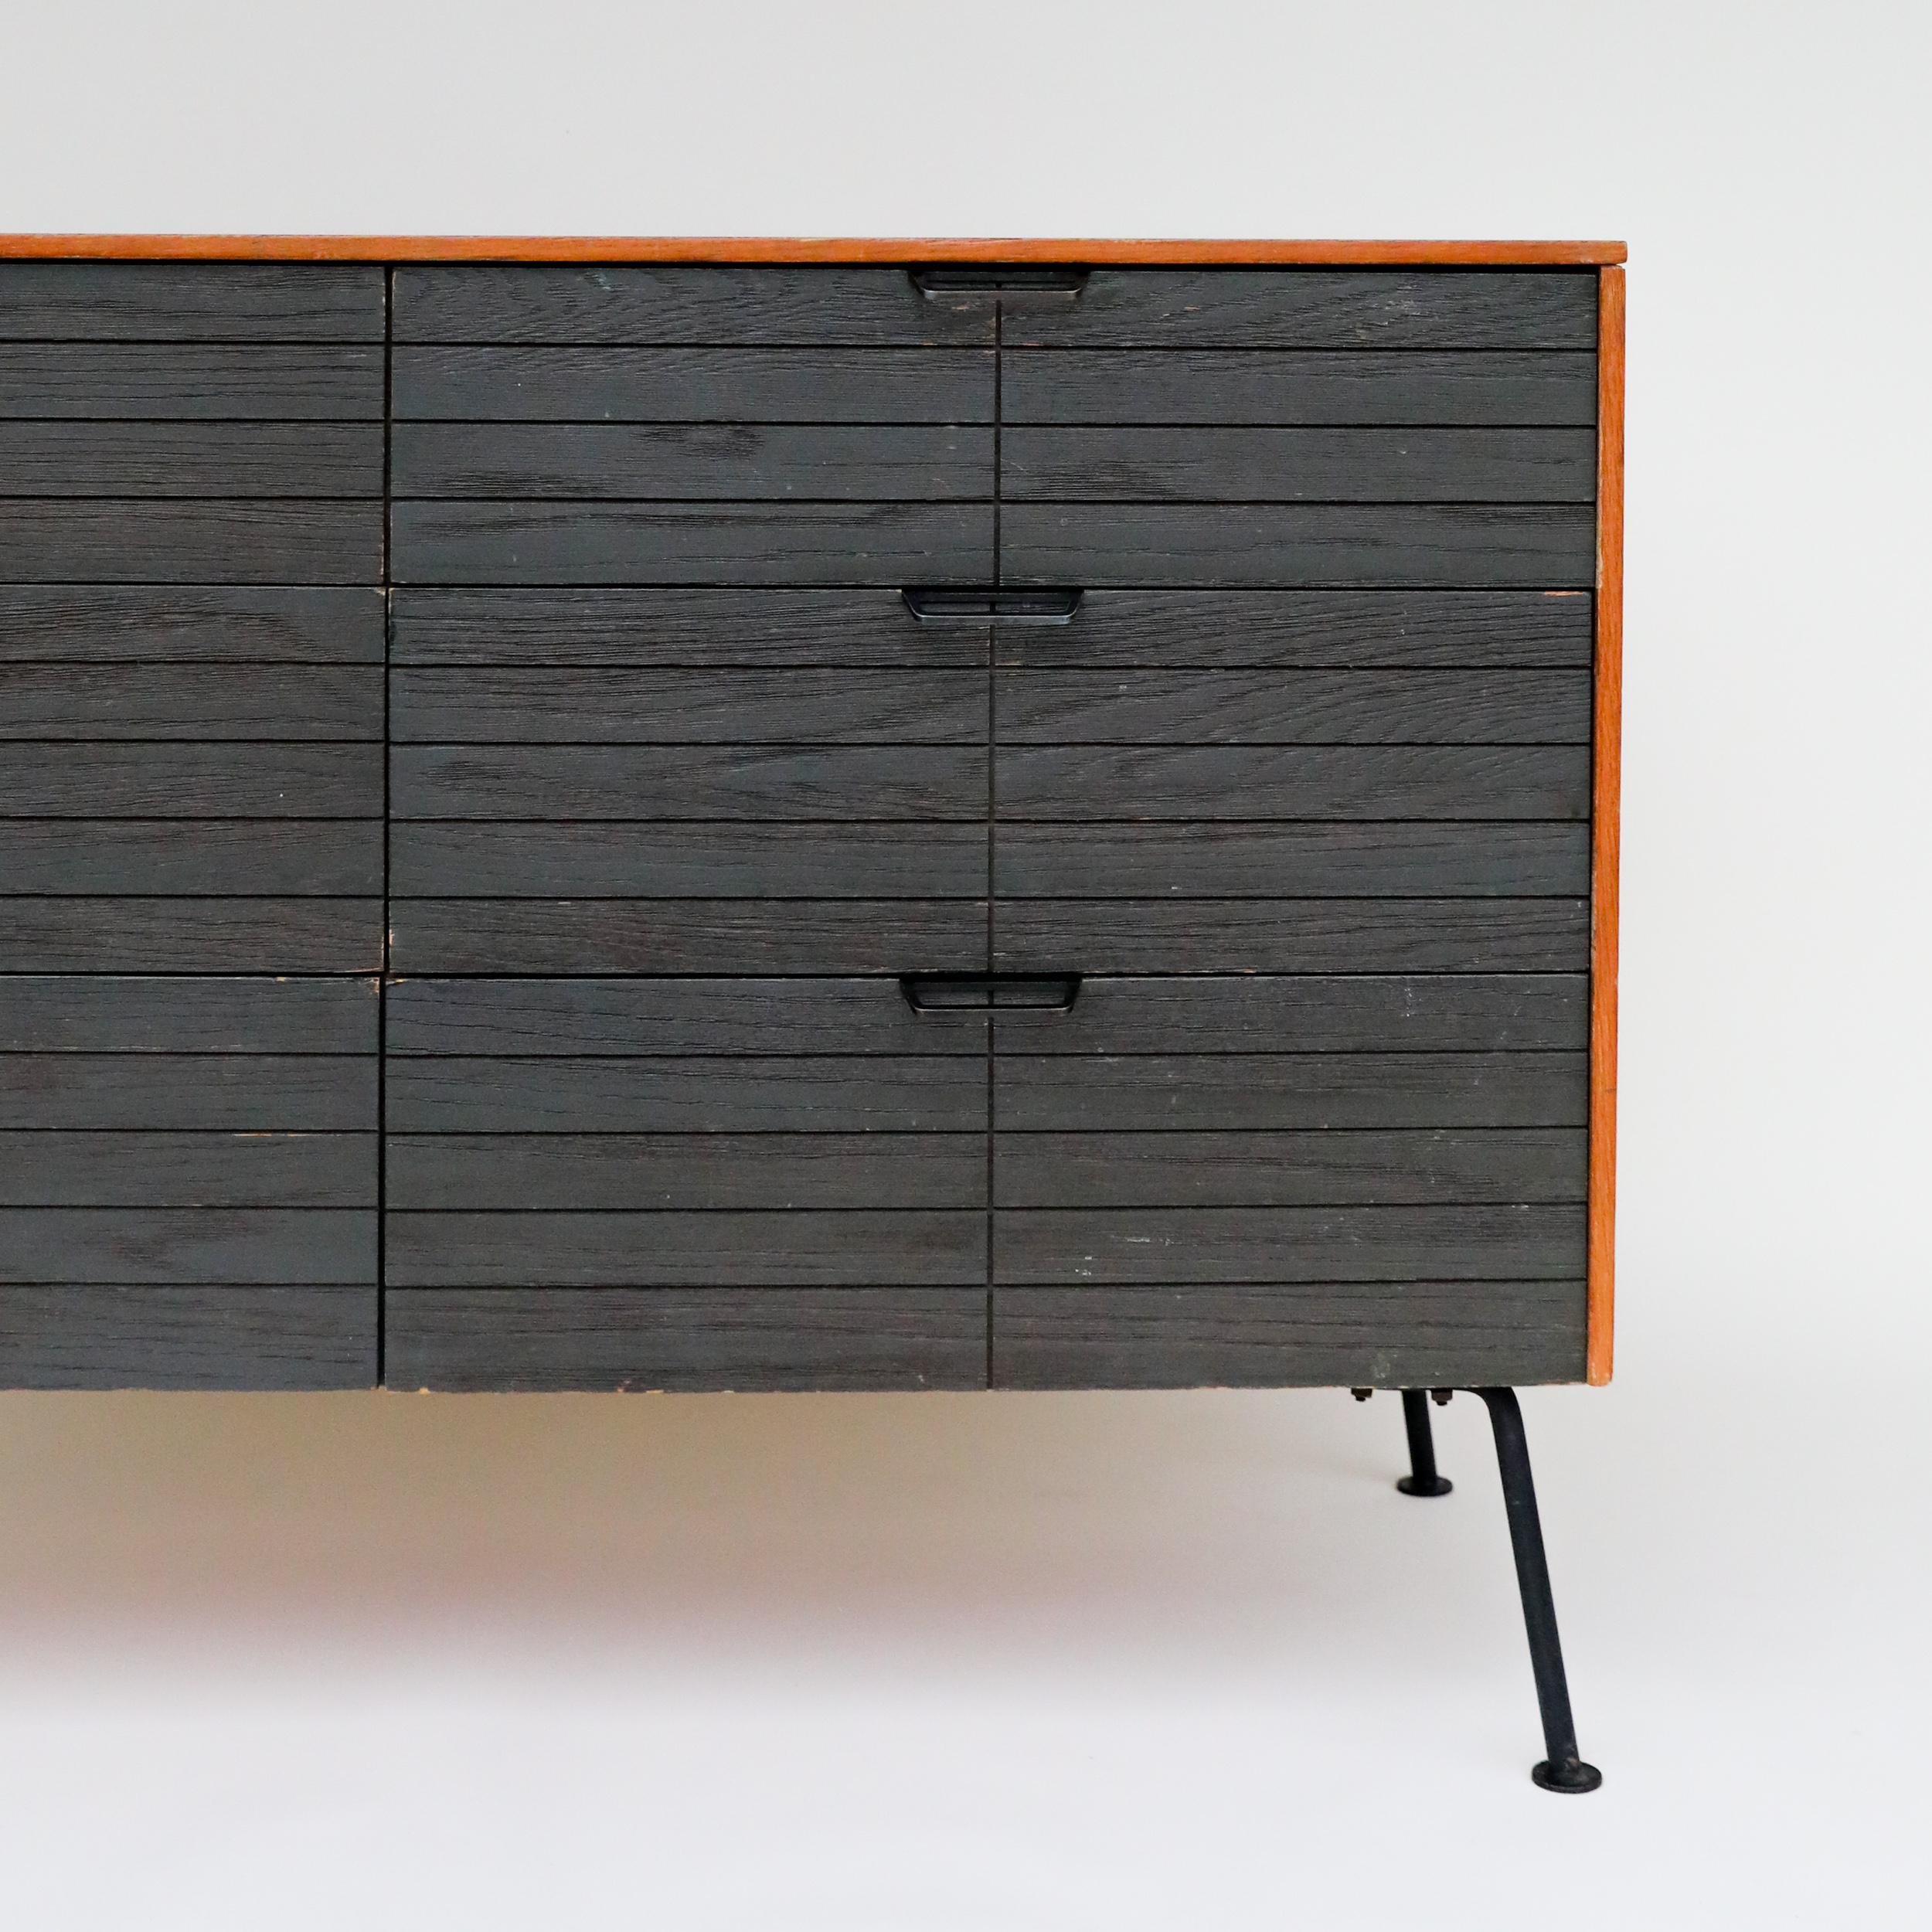 *Price includes Restoration

Uber rare and early Mid-Century Modern dresser by Raymond Loewy for Mengel furniture company. It features enameled oak drawer fronts, modern black steel pulls, and splayed wrought iron legs.

These dressers were